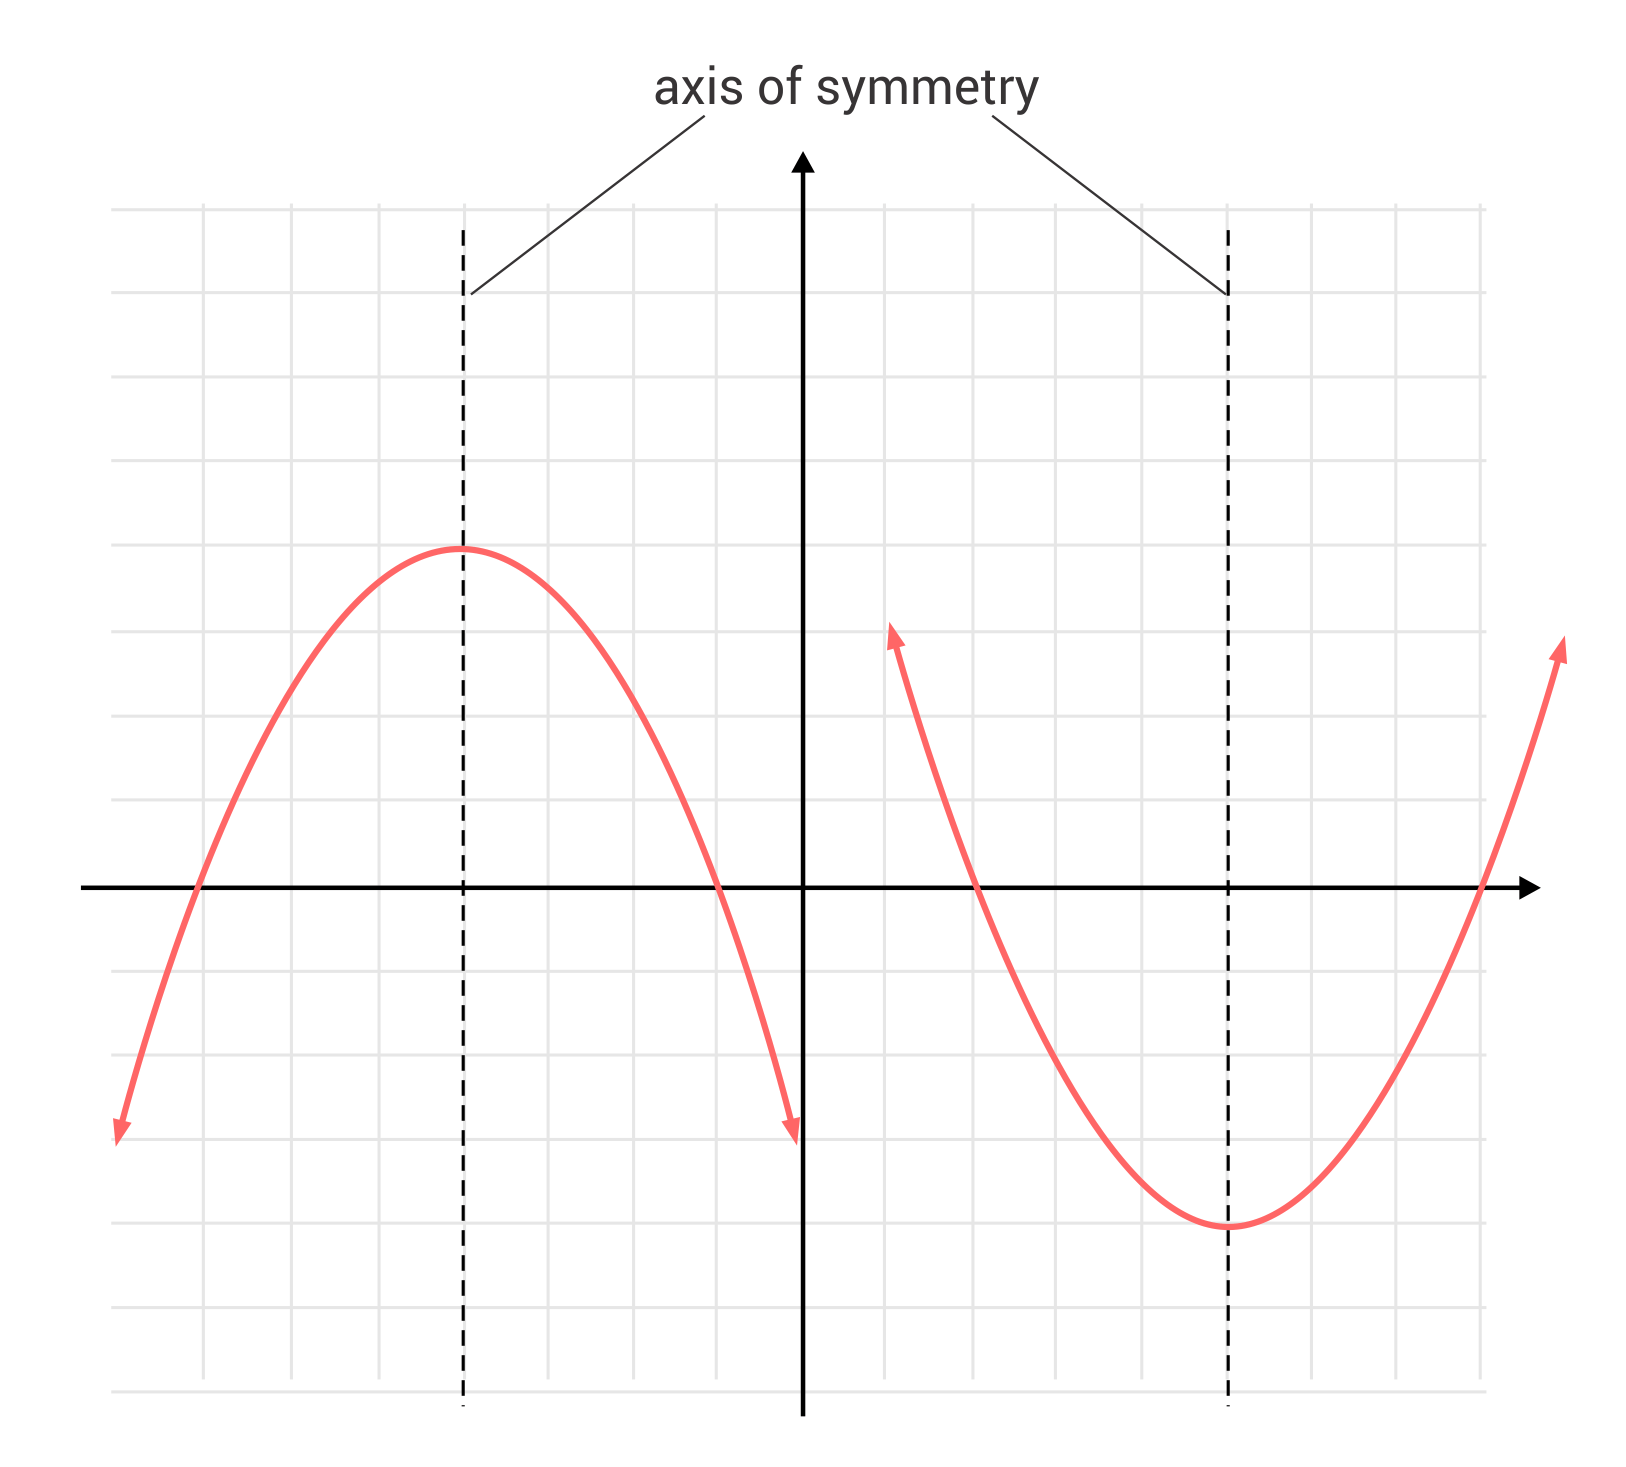 axis of symmetry, two parabolas, left one facing down, right one facing up, on a coordinate plane, dashed vertical line going through the middle of both figures